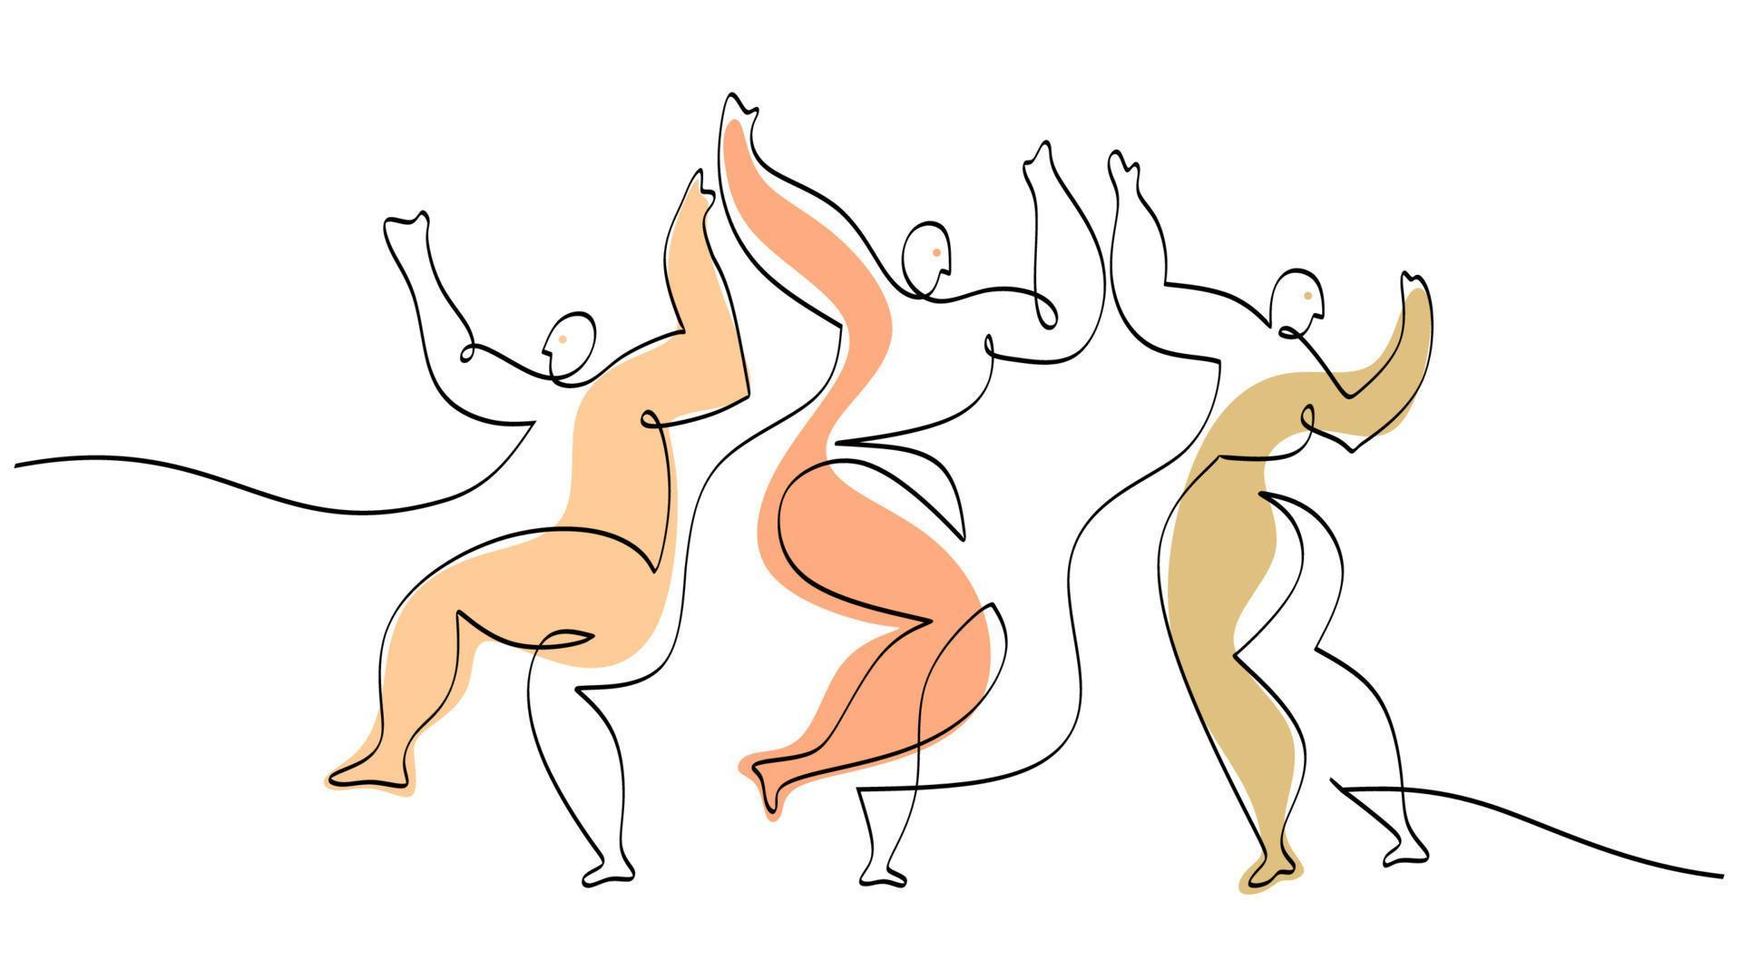 One single line drawing of three dancing people picasso style. vector